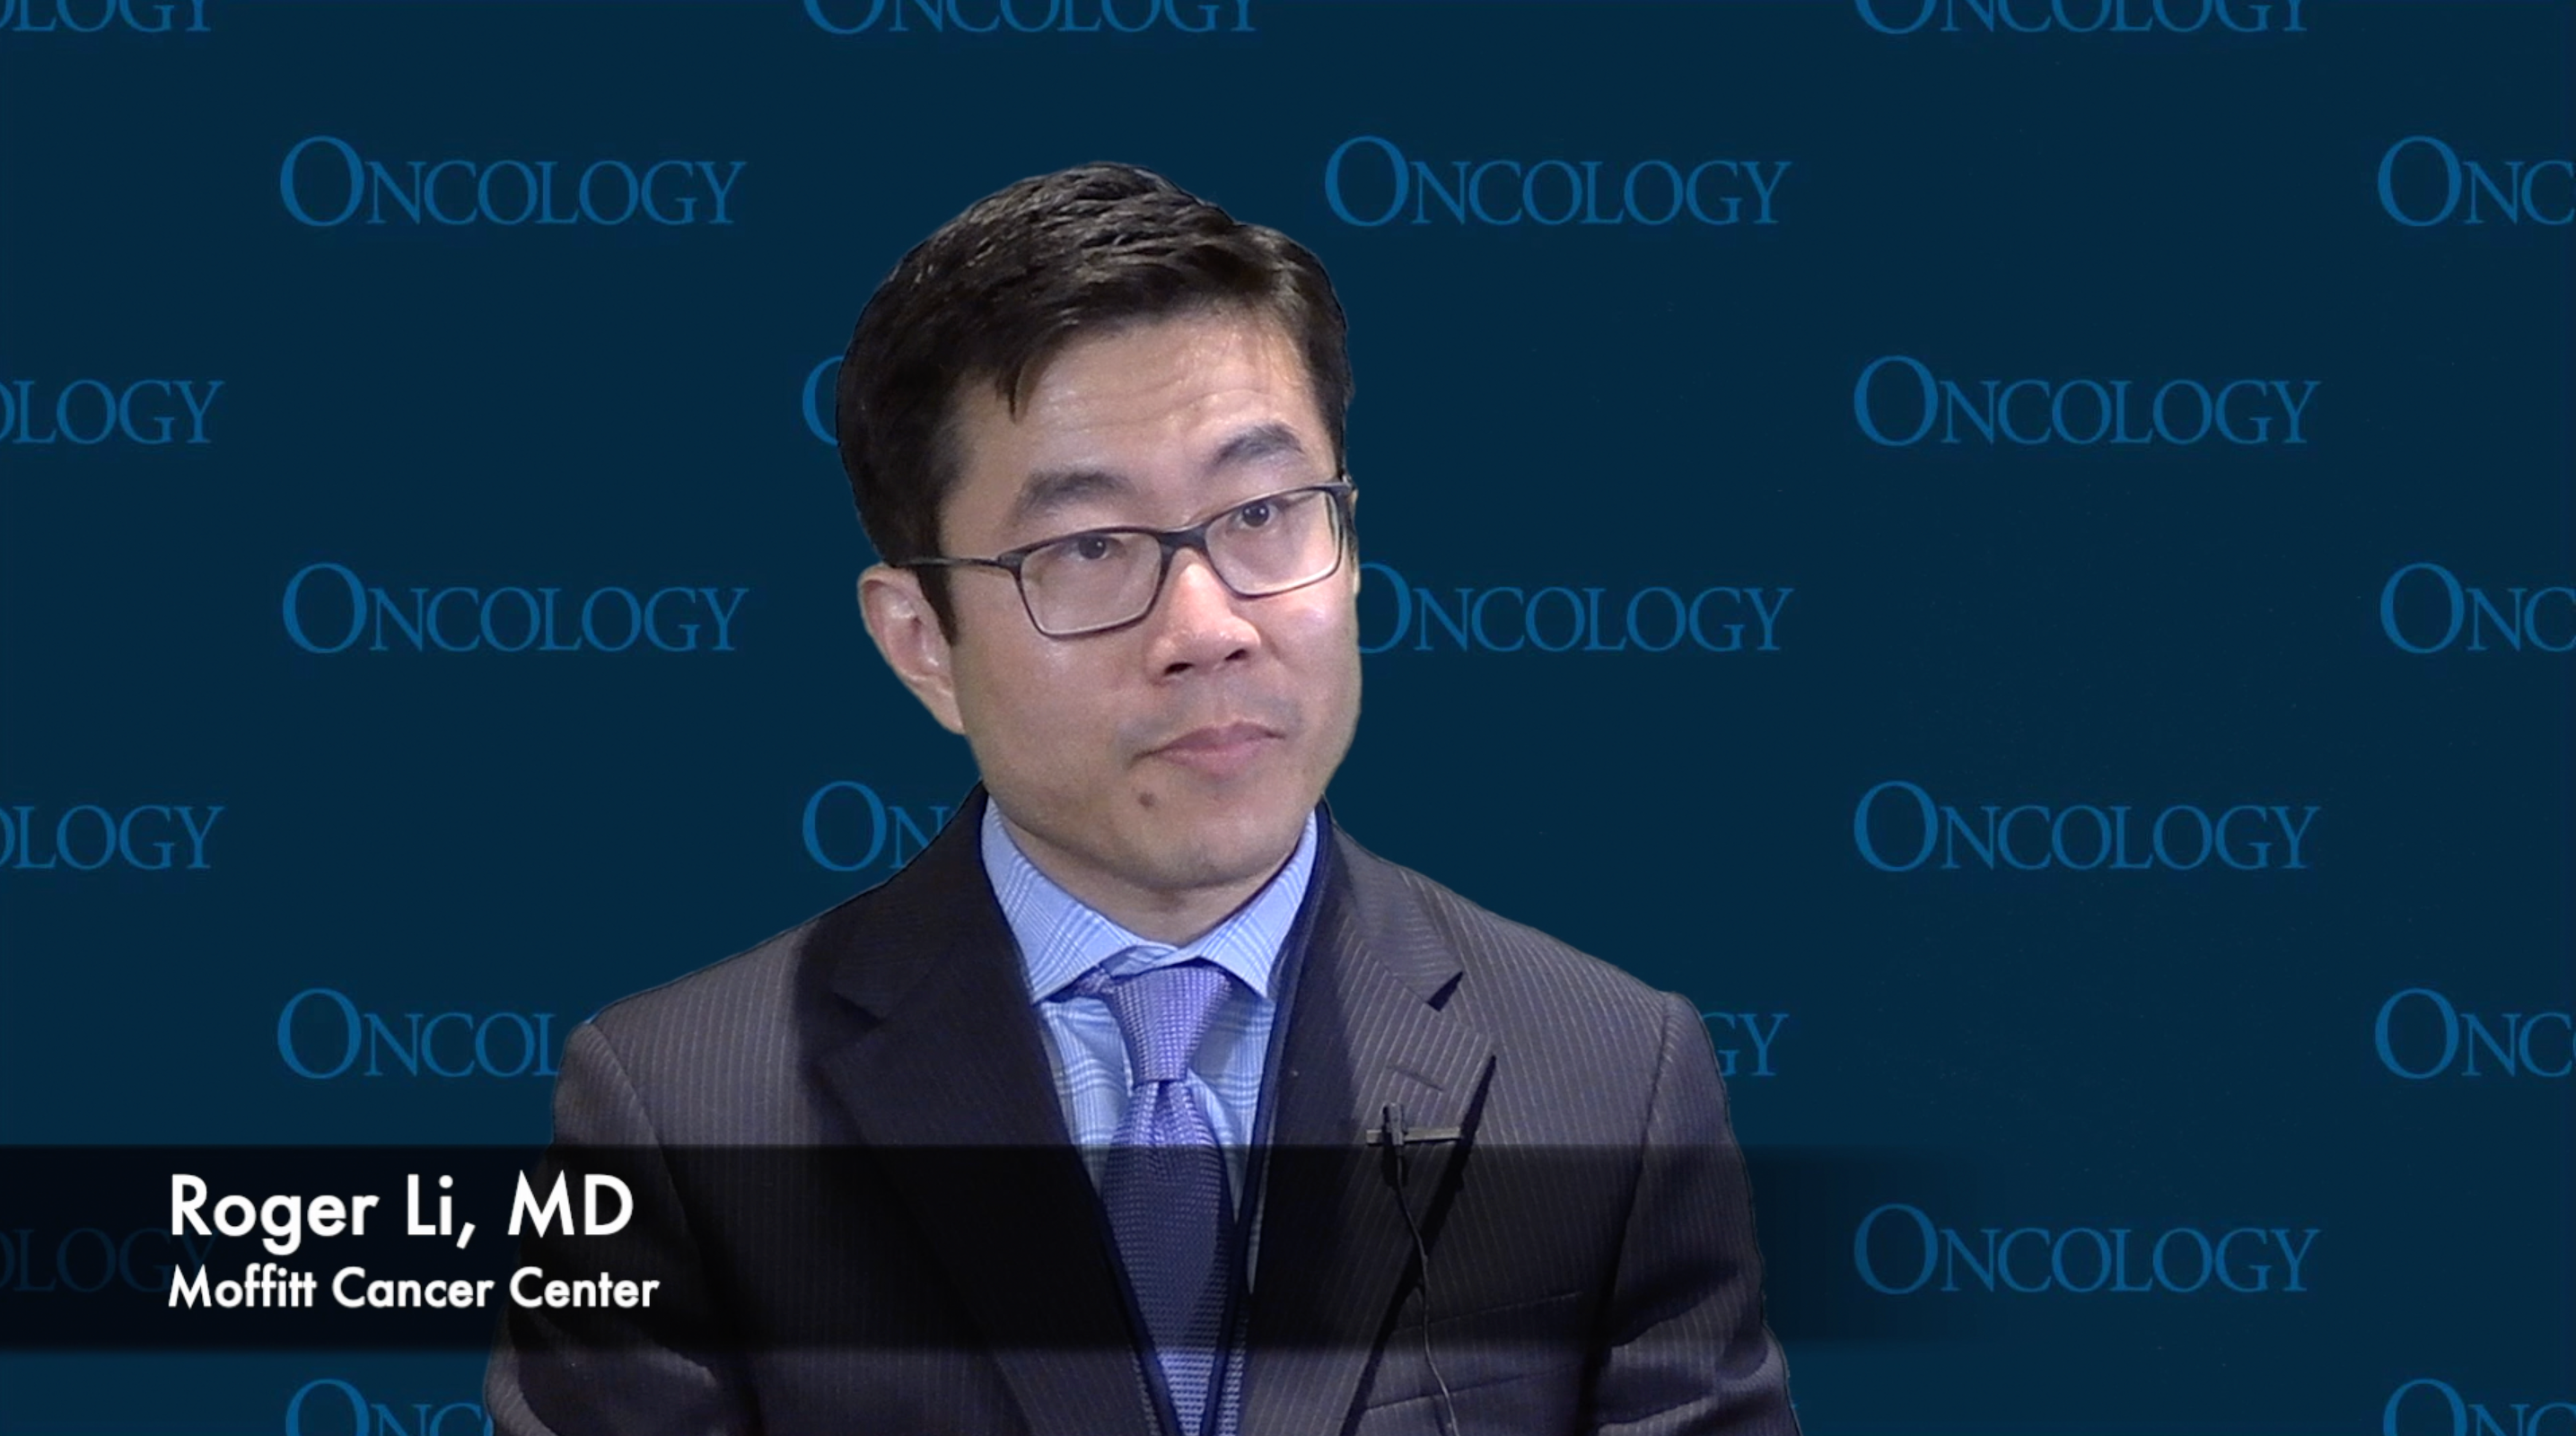 Roger Li, MD, Examines the Safety Profile of CG0070 Plus Pembrolizumab in BCG-Unresponsive NMIBC